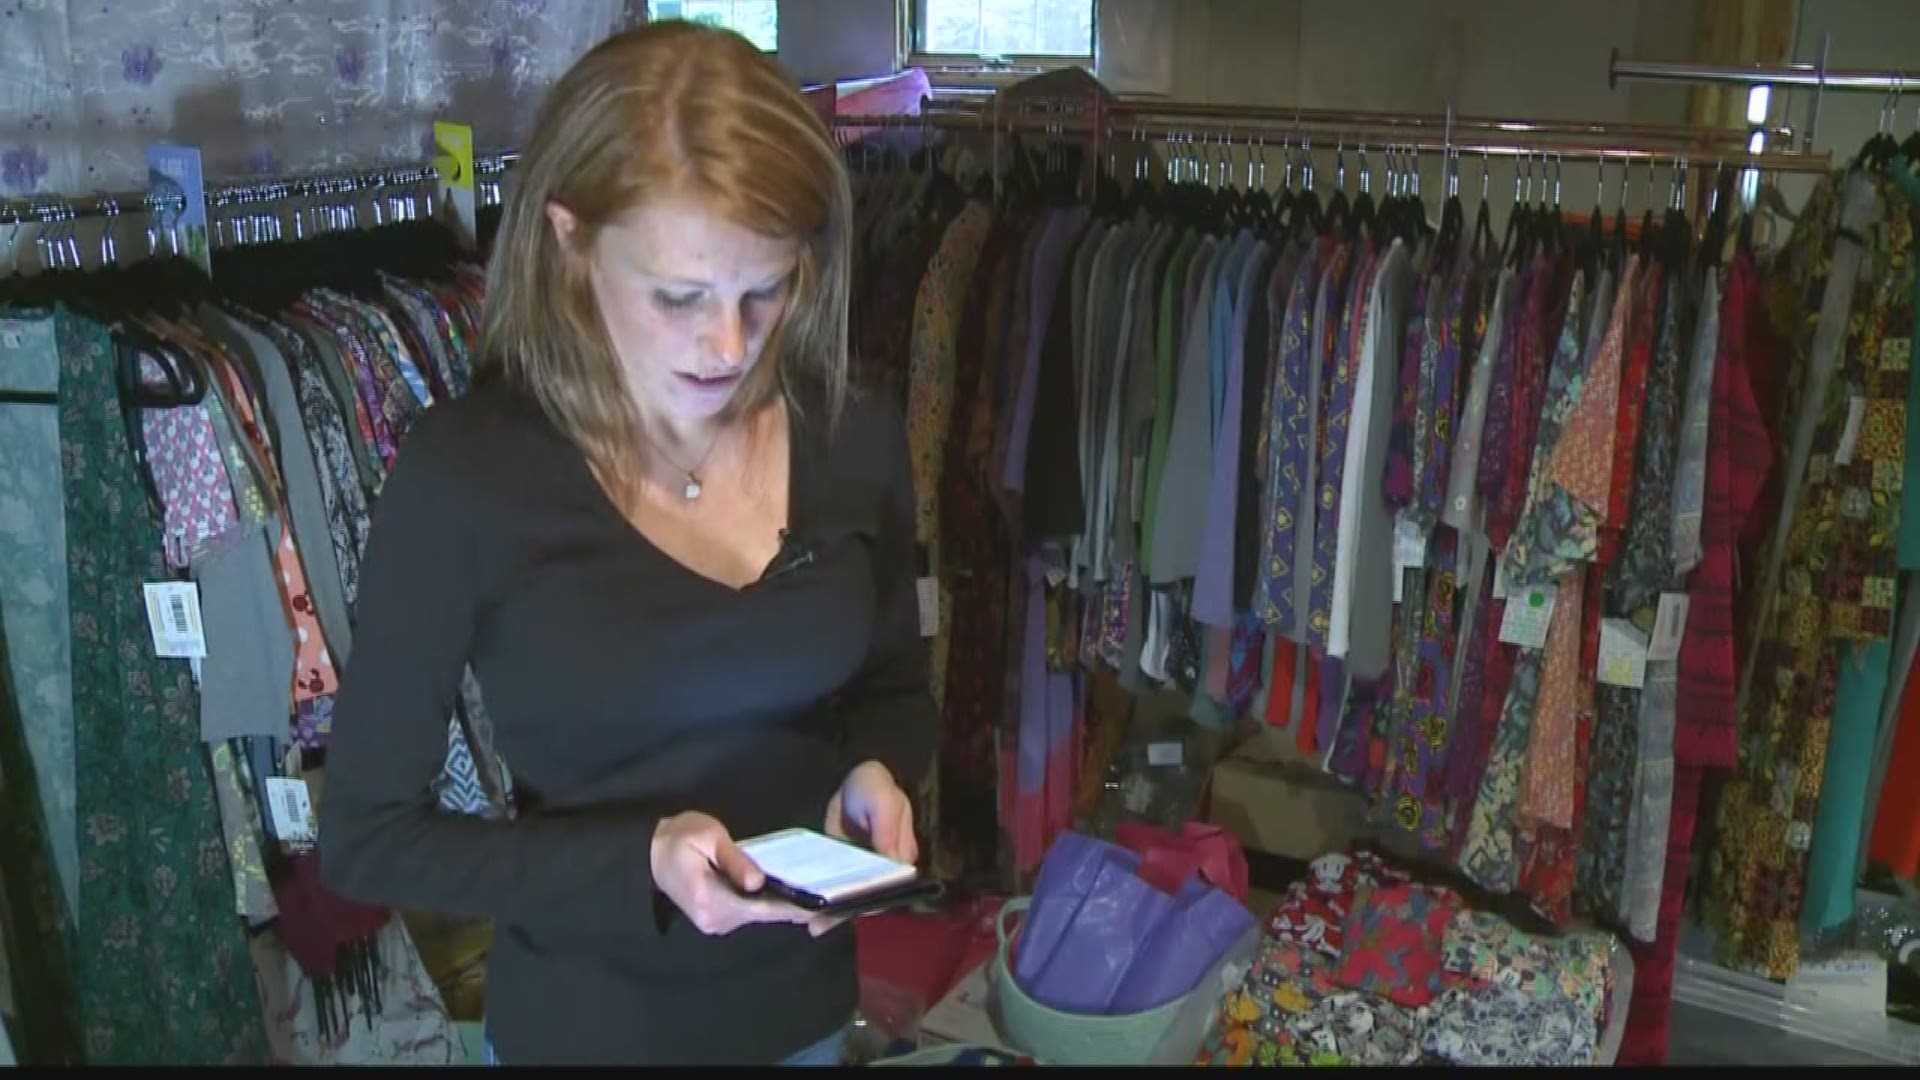 It seemed so promising - working from home, making money, and making your own hours. But is it all it's cracked up to be? LuLaRoe consultants say no after a company policy change.